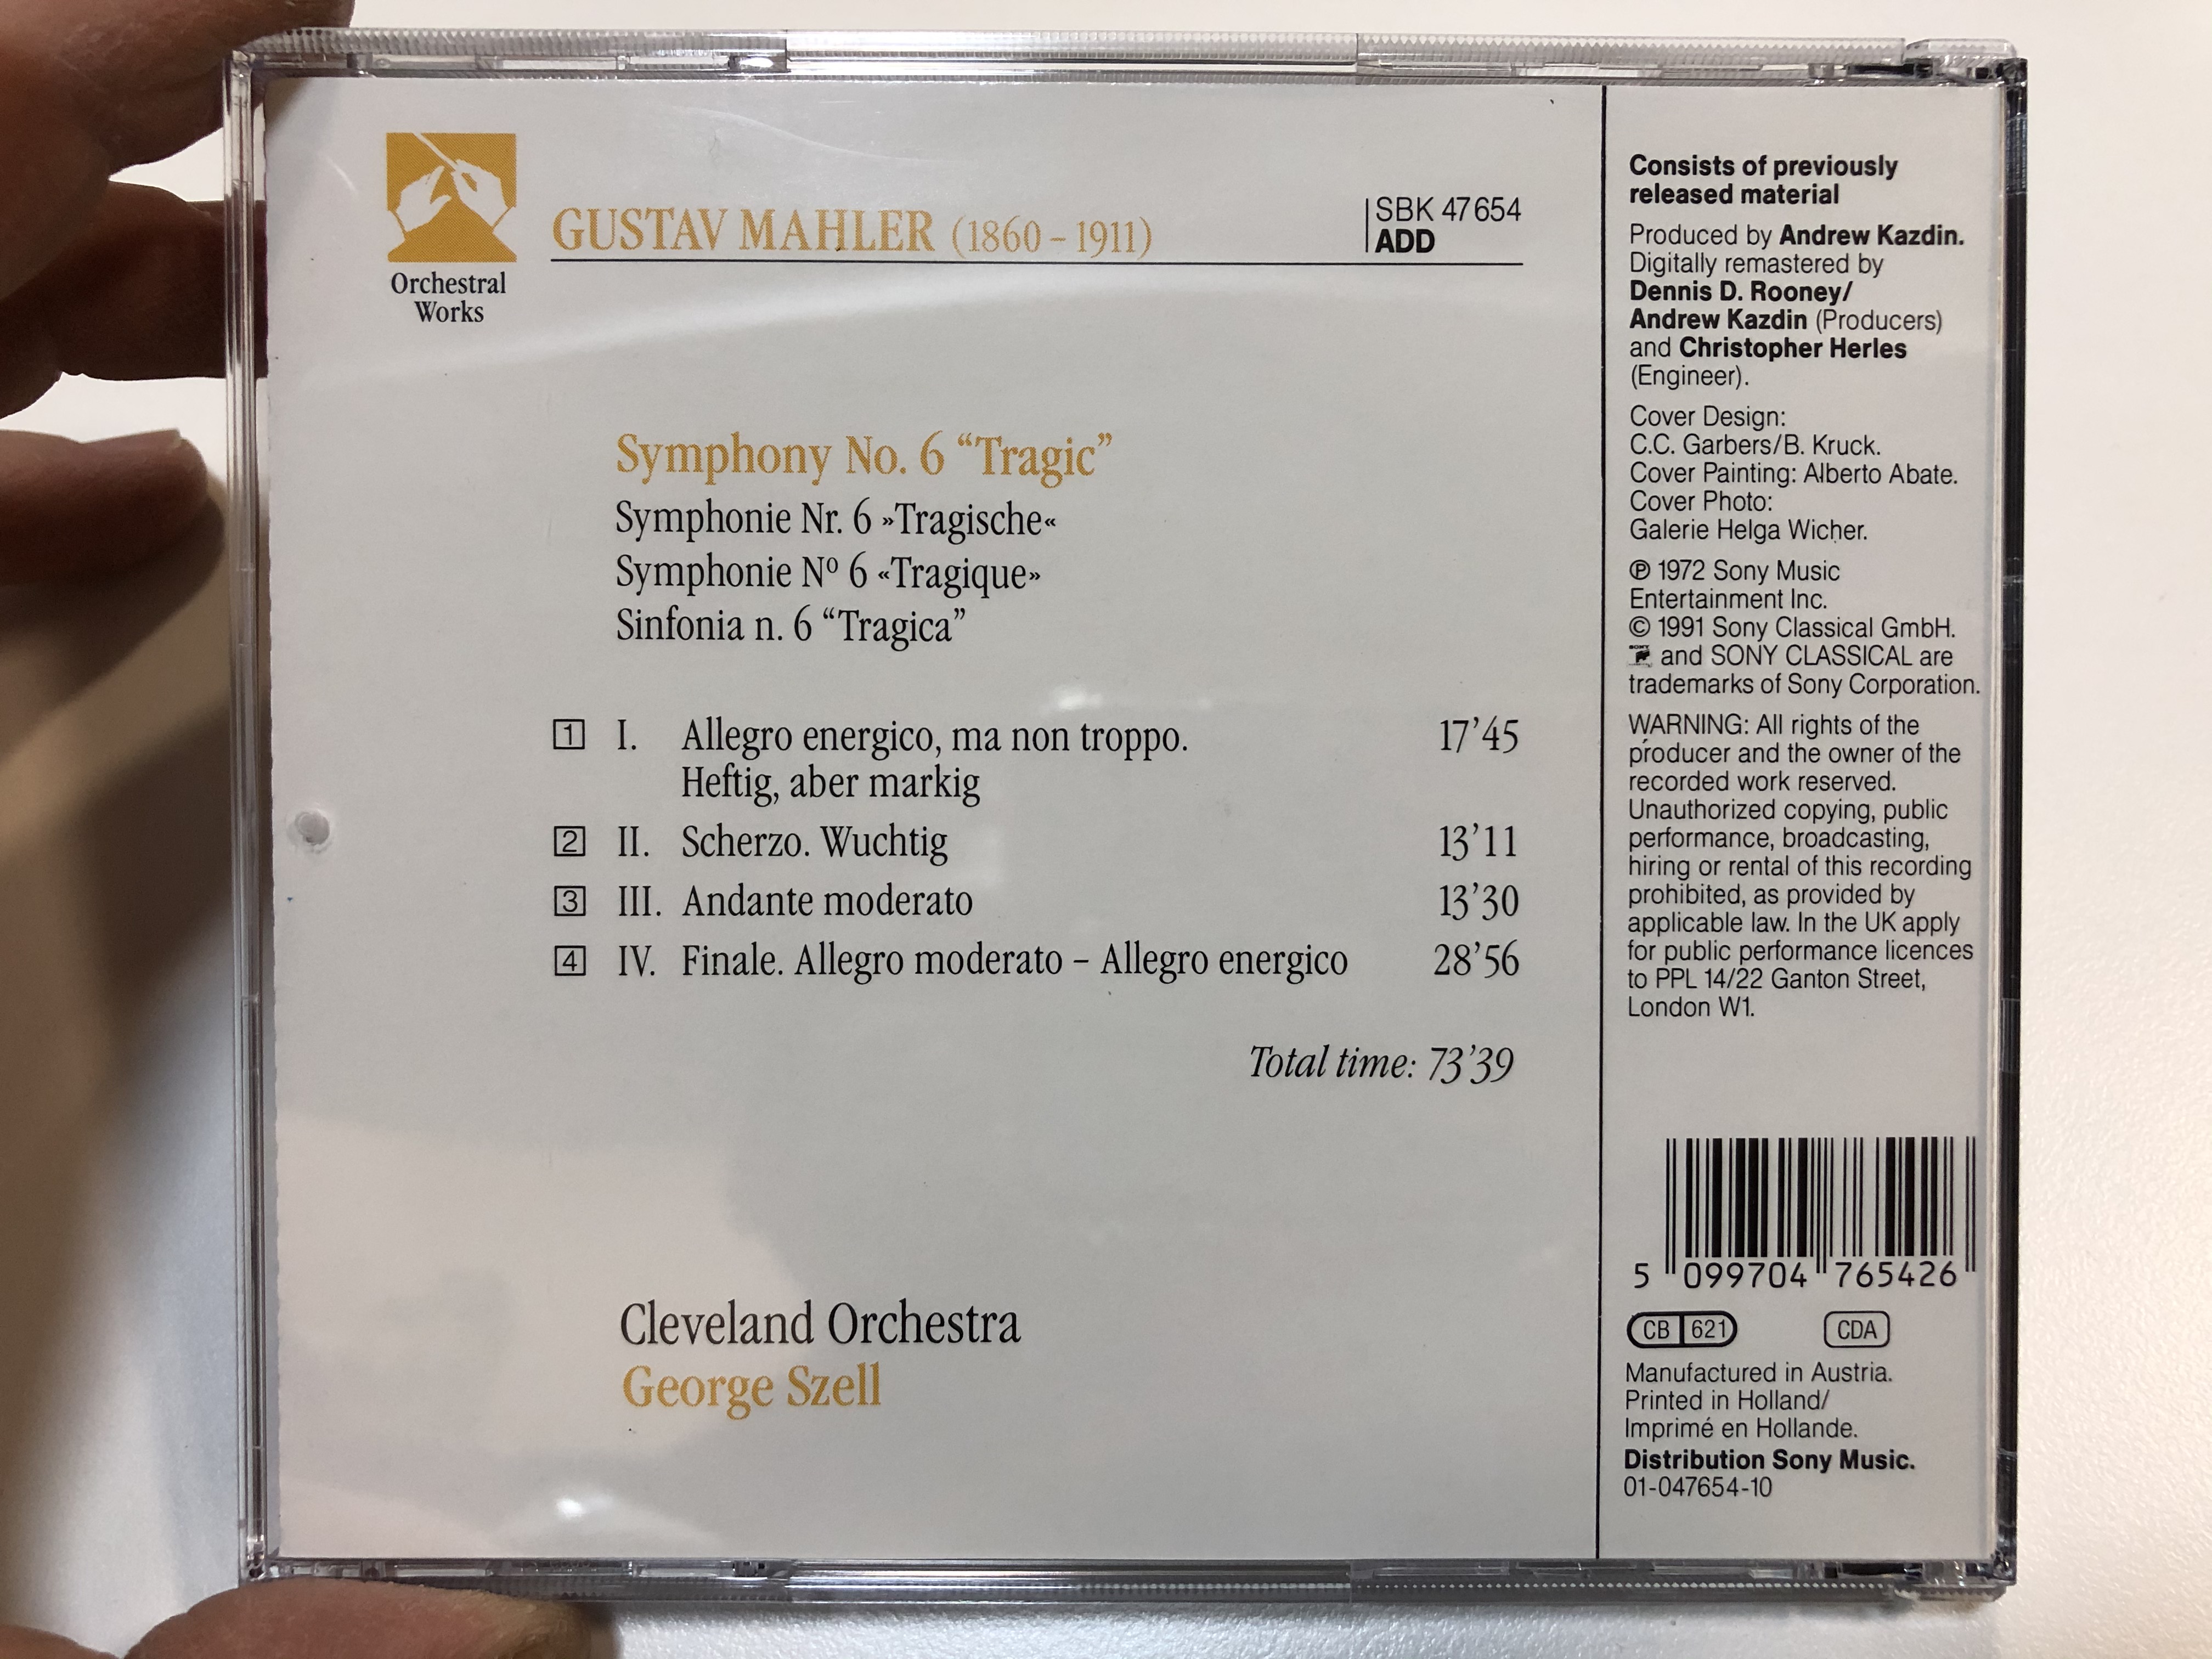 mahler-symphony-no.-6-tragic-cleveland-orchestra-george-szell-essential-classics-orchestral-works-sony-classical-audio-cd-1991-sbk-47654-2-.jpg